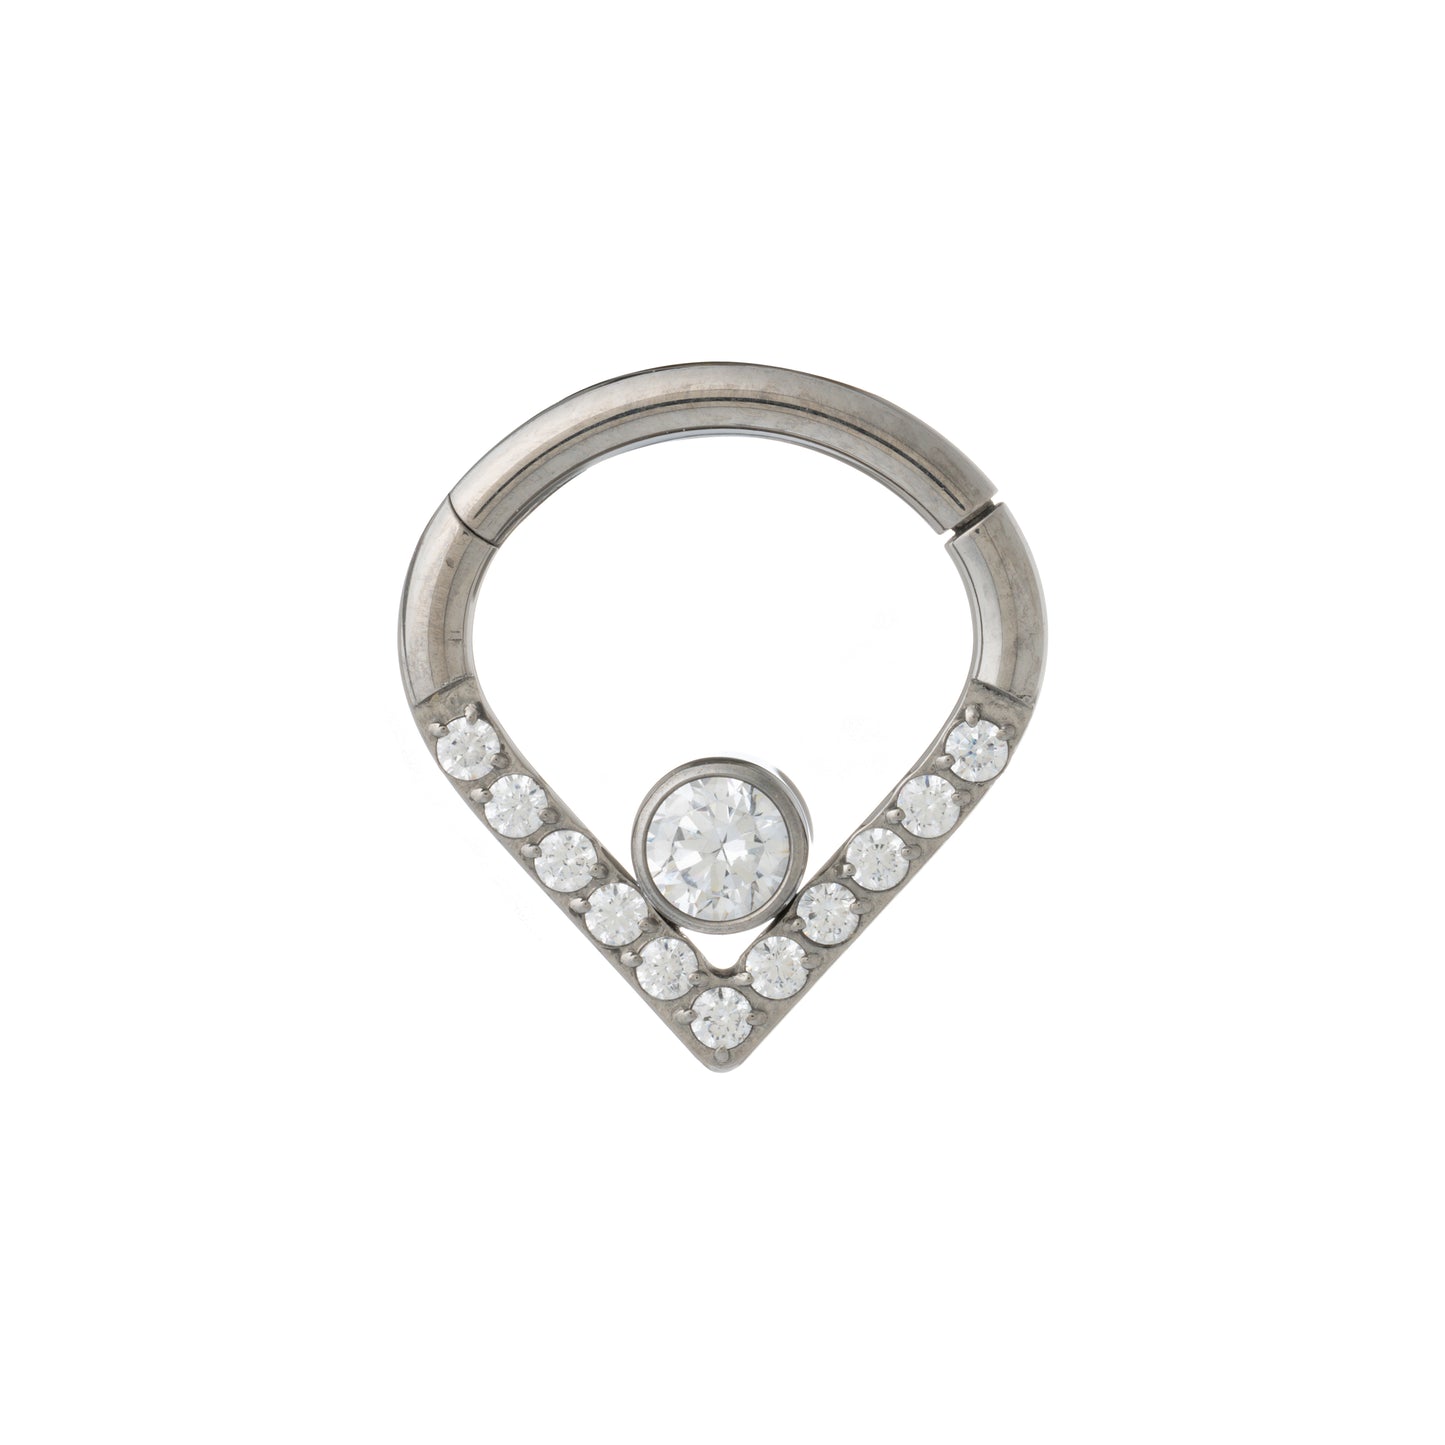 Titanium Hinged Segment Ring Heart Shaped With CZ Face Stones